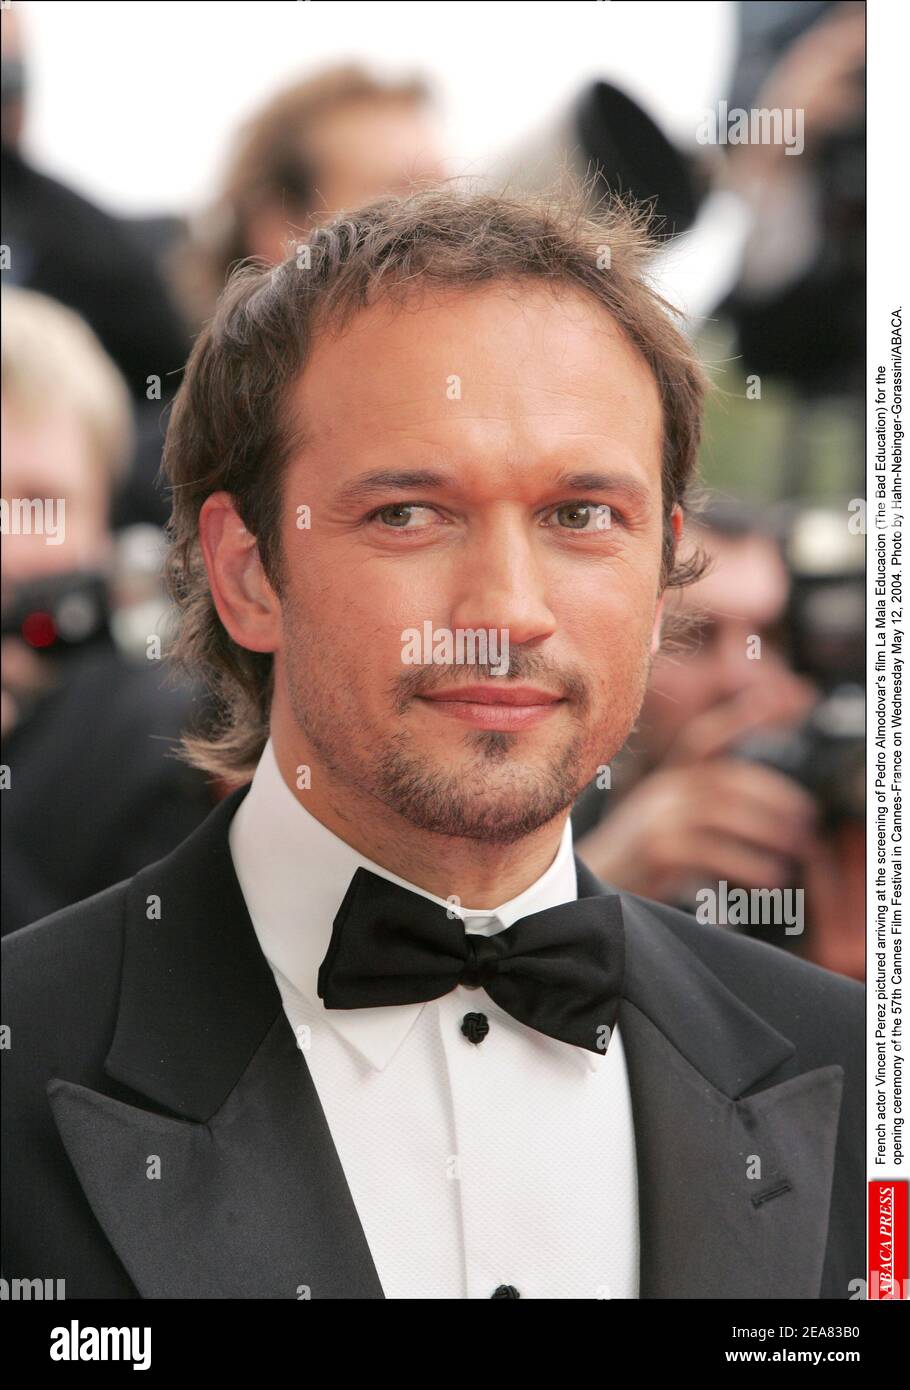 Swiss actor Vincent Perez pictured arriving at the screening of Pedro Almodovar's film La Mala Educacion (The Bad Education) for the opening ceremony of the 57th Cannes Film Festival in Cannes-France on Wednesday May 12, 2004. Photo by Hahn-Nebinger-Gorassini/ABACA. Stock Photo